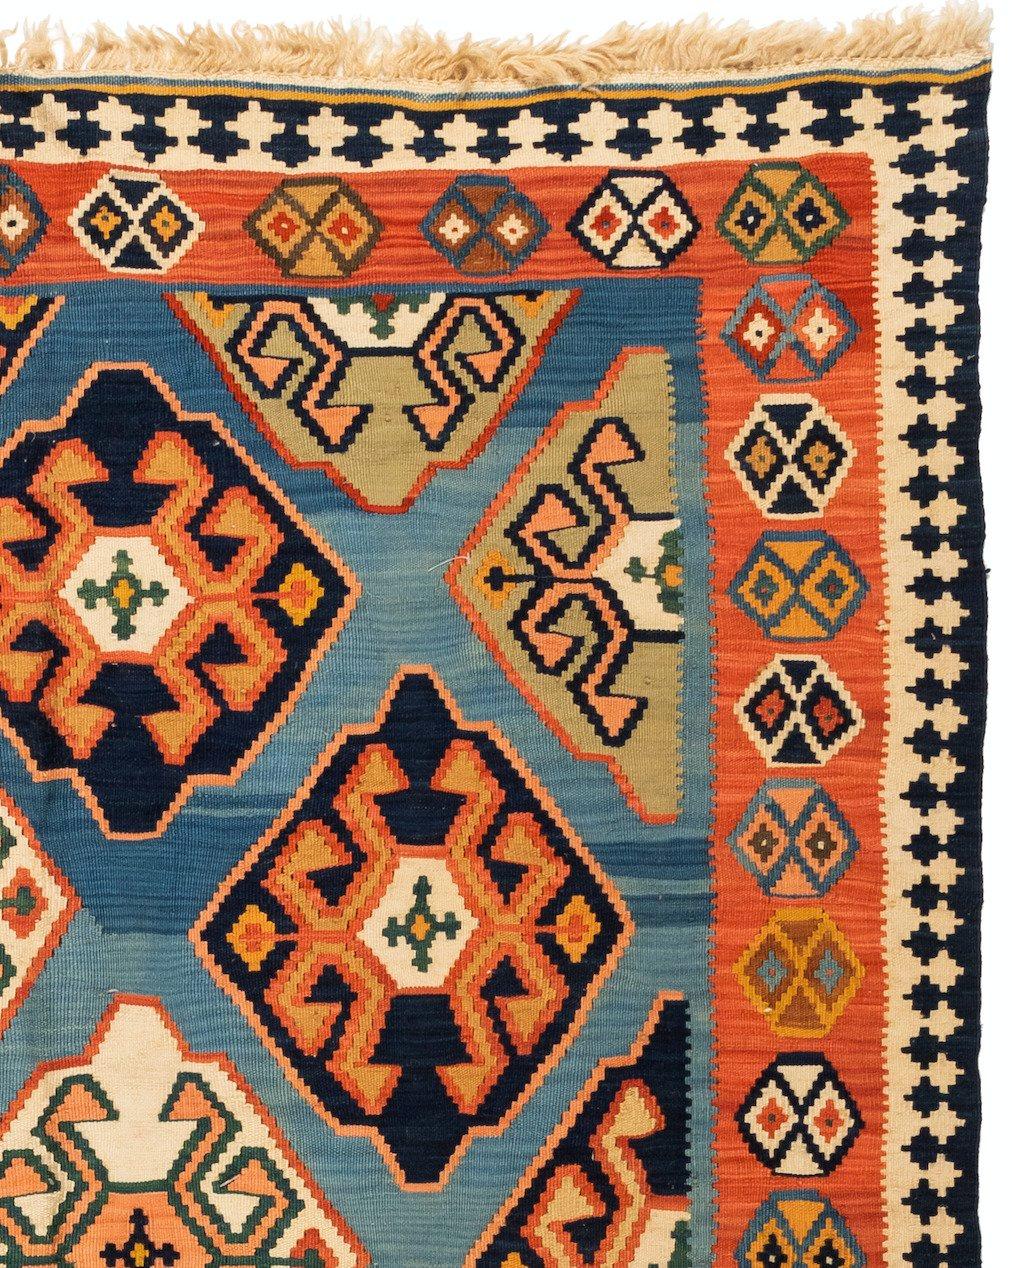 Hand-Woven Vintage Blue and Rust Tribal Caucasian Kilim Flat Weave Rug, circa 1940s